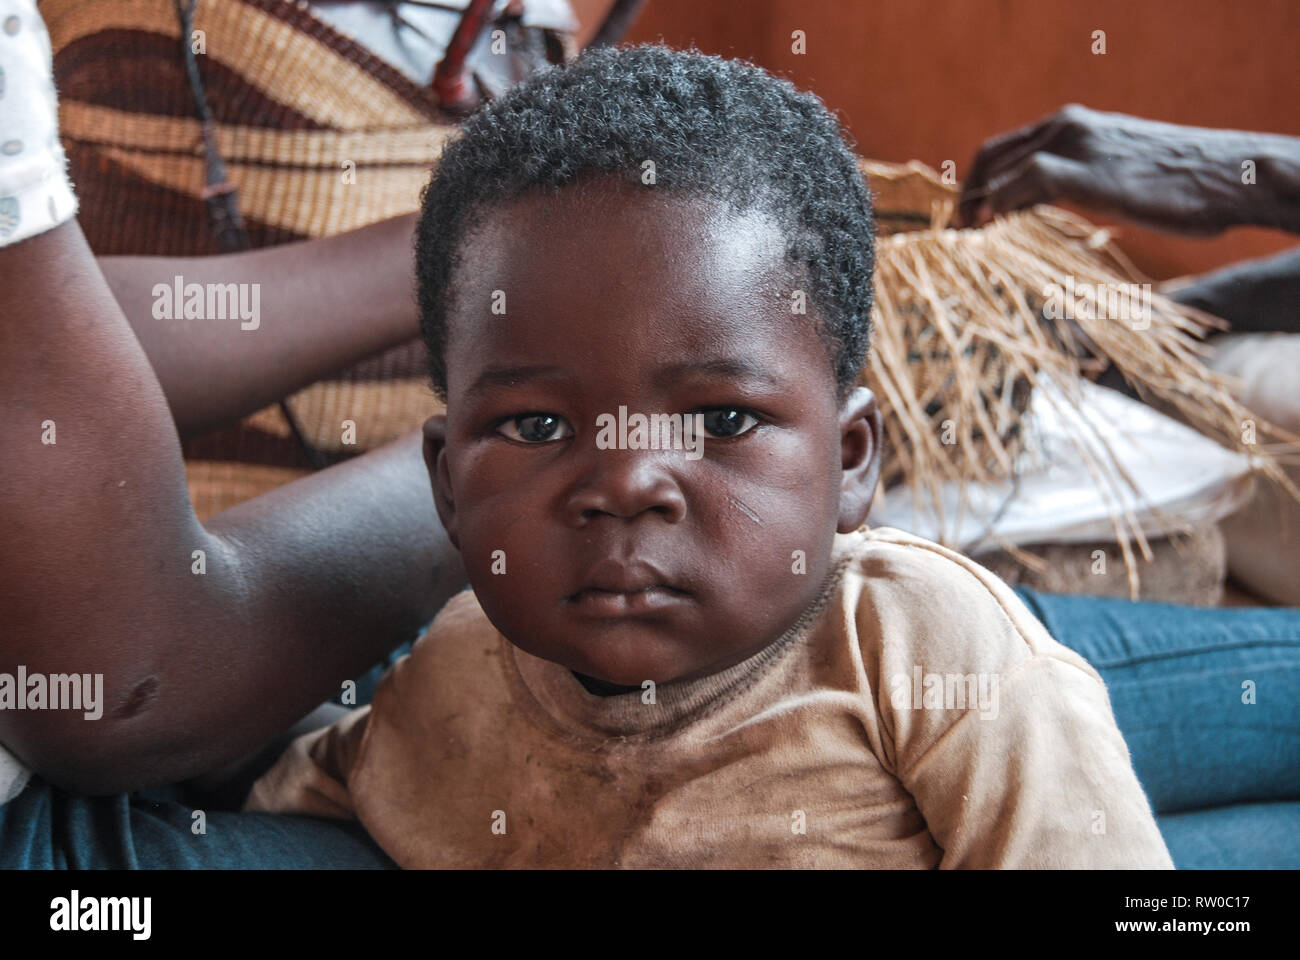 A portrait of a serious looking young adorable Ghanaian boy toddler with tribal marking. Stock Photo